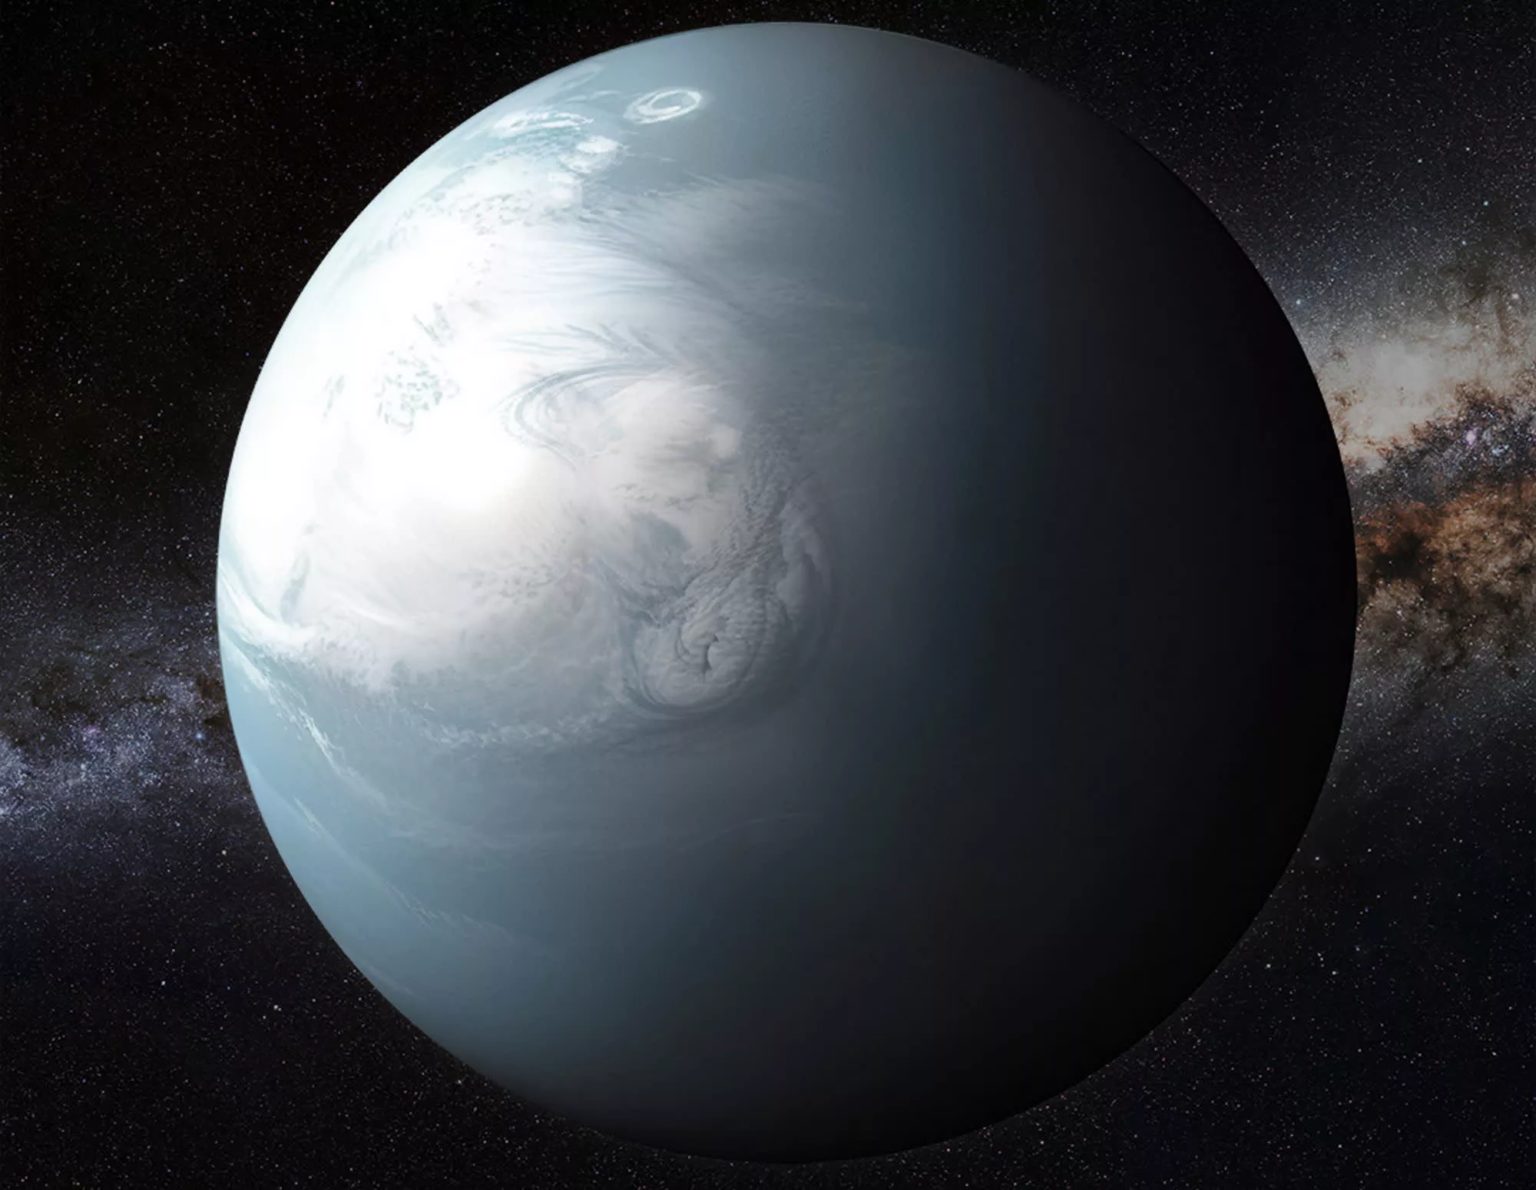 This hycean exoplanet could be covered in a boiling ocean